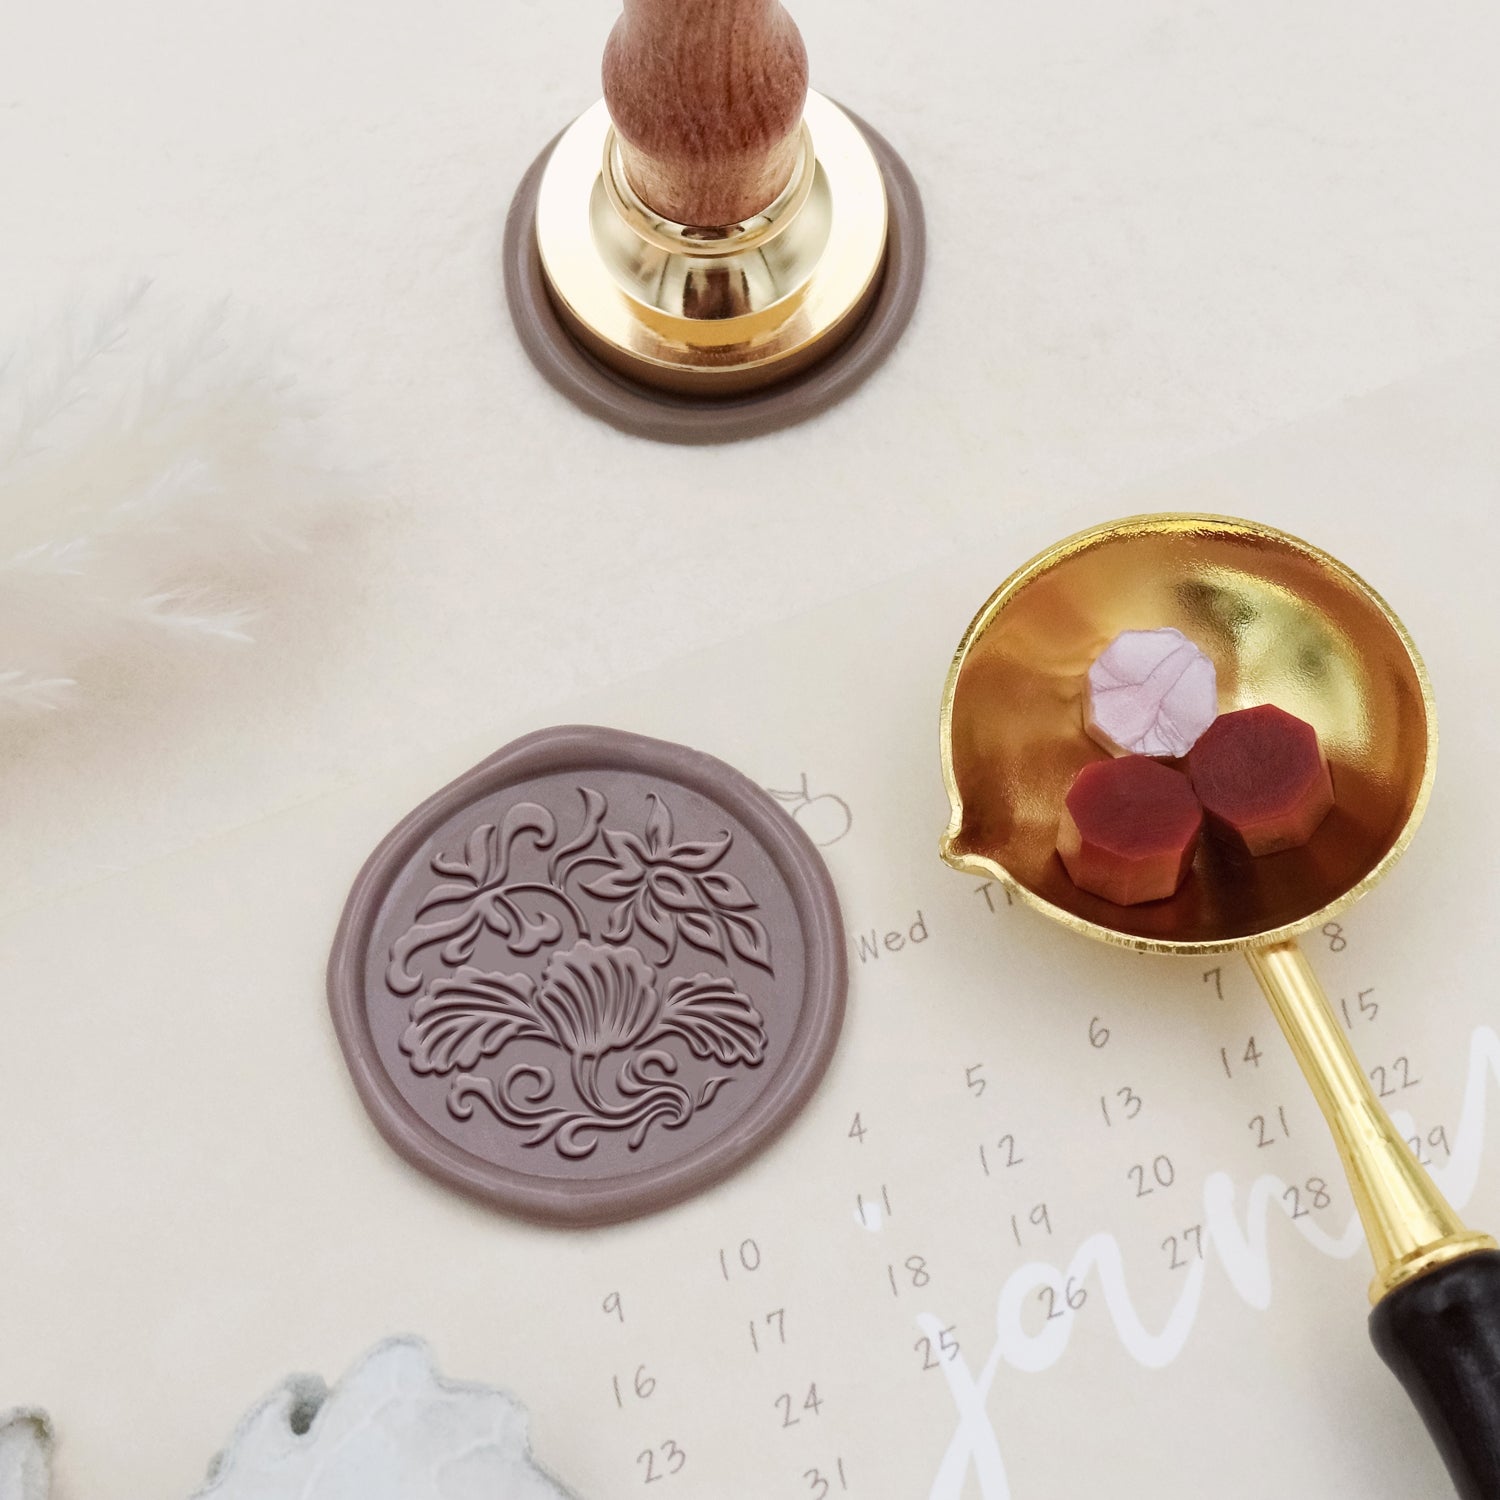 Floral Tile Pattern Wax Seal Stamp - Style 6 4